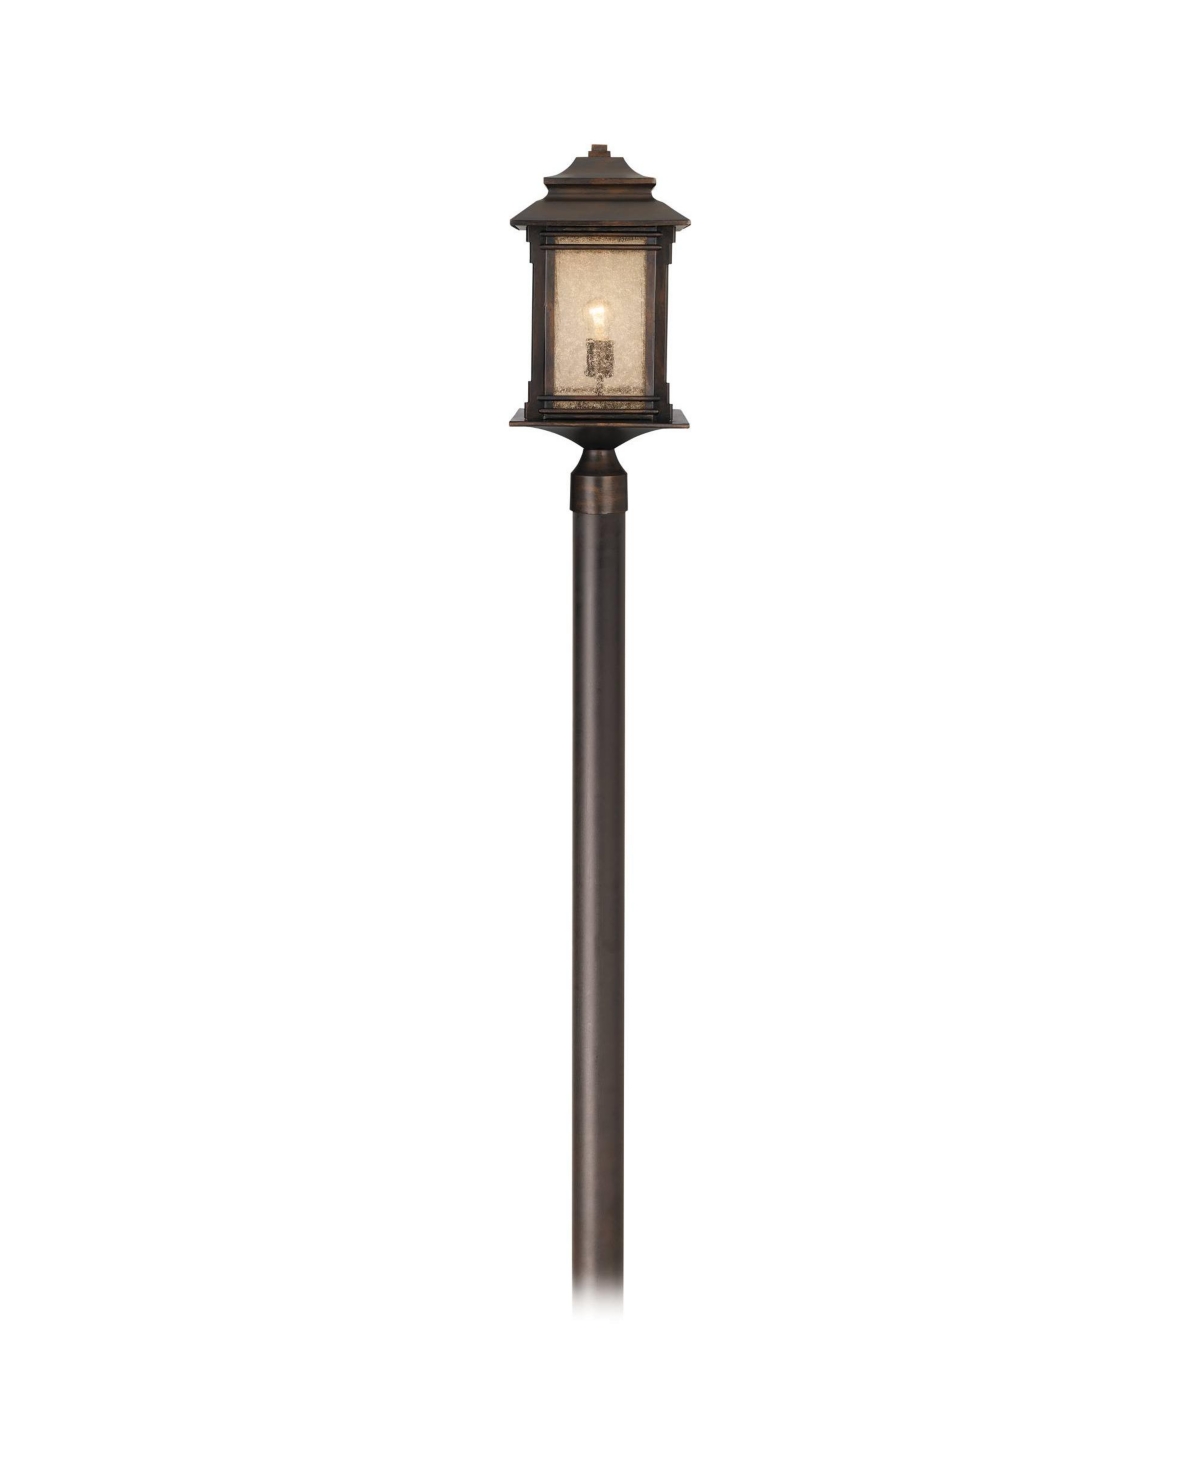 Hickory Point Mission Outdoor Post Light with Direct Burial Pole Walnut Bronze 104" Frosted Cream Glass for Exterior House Porch Patio Outside Deck Dr